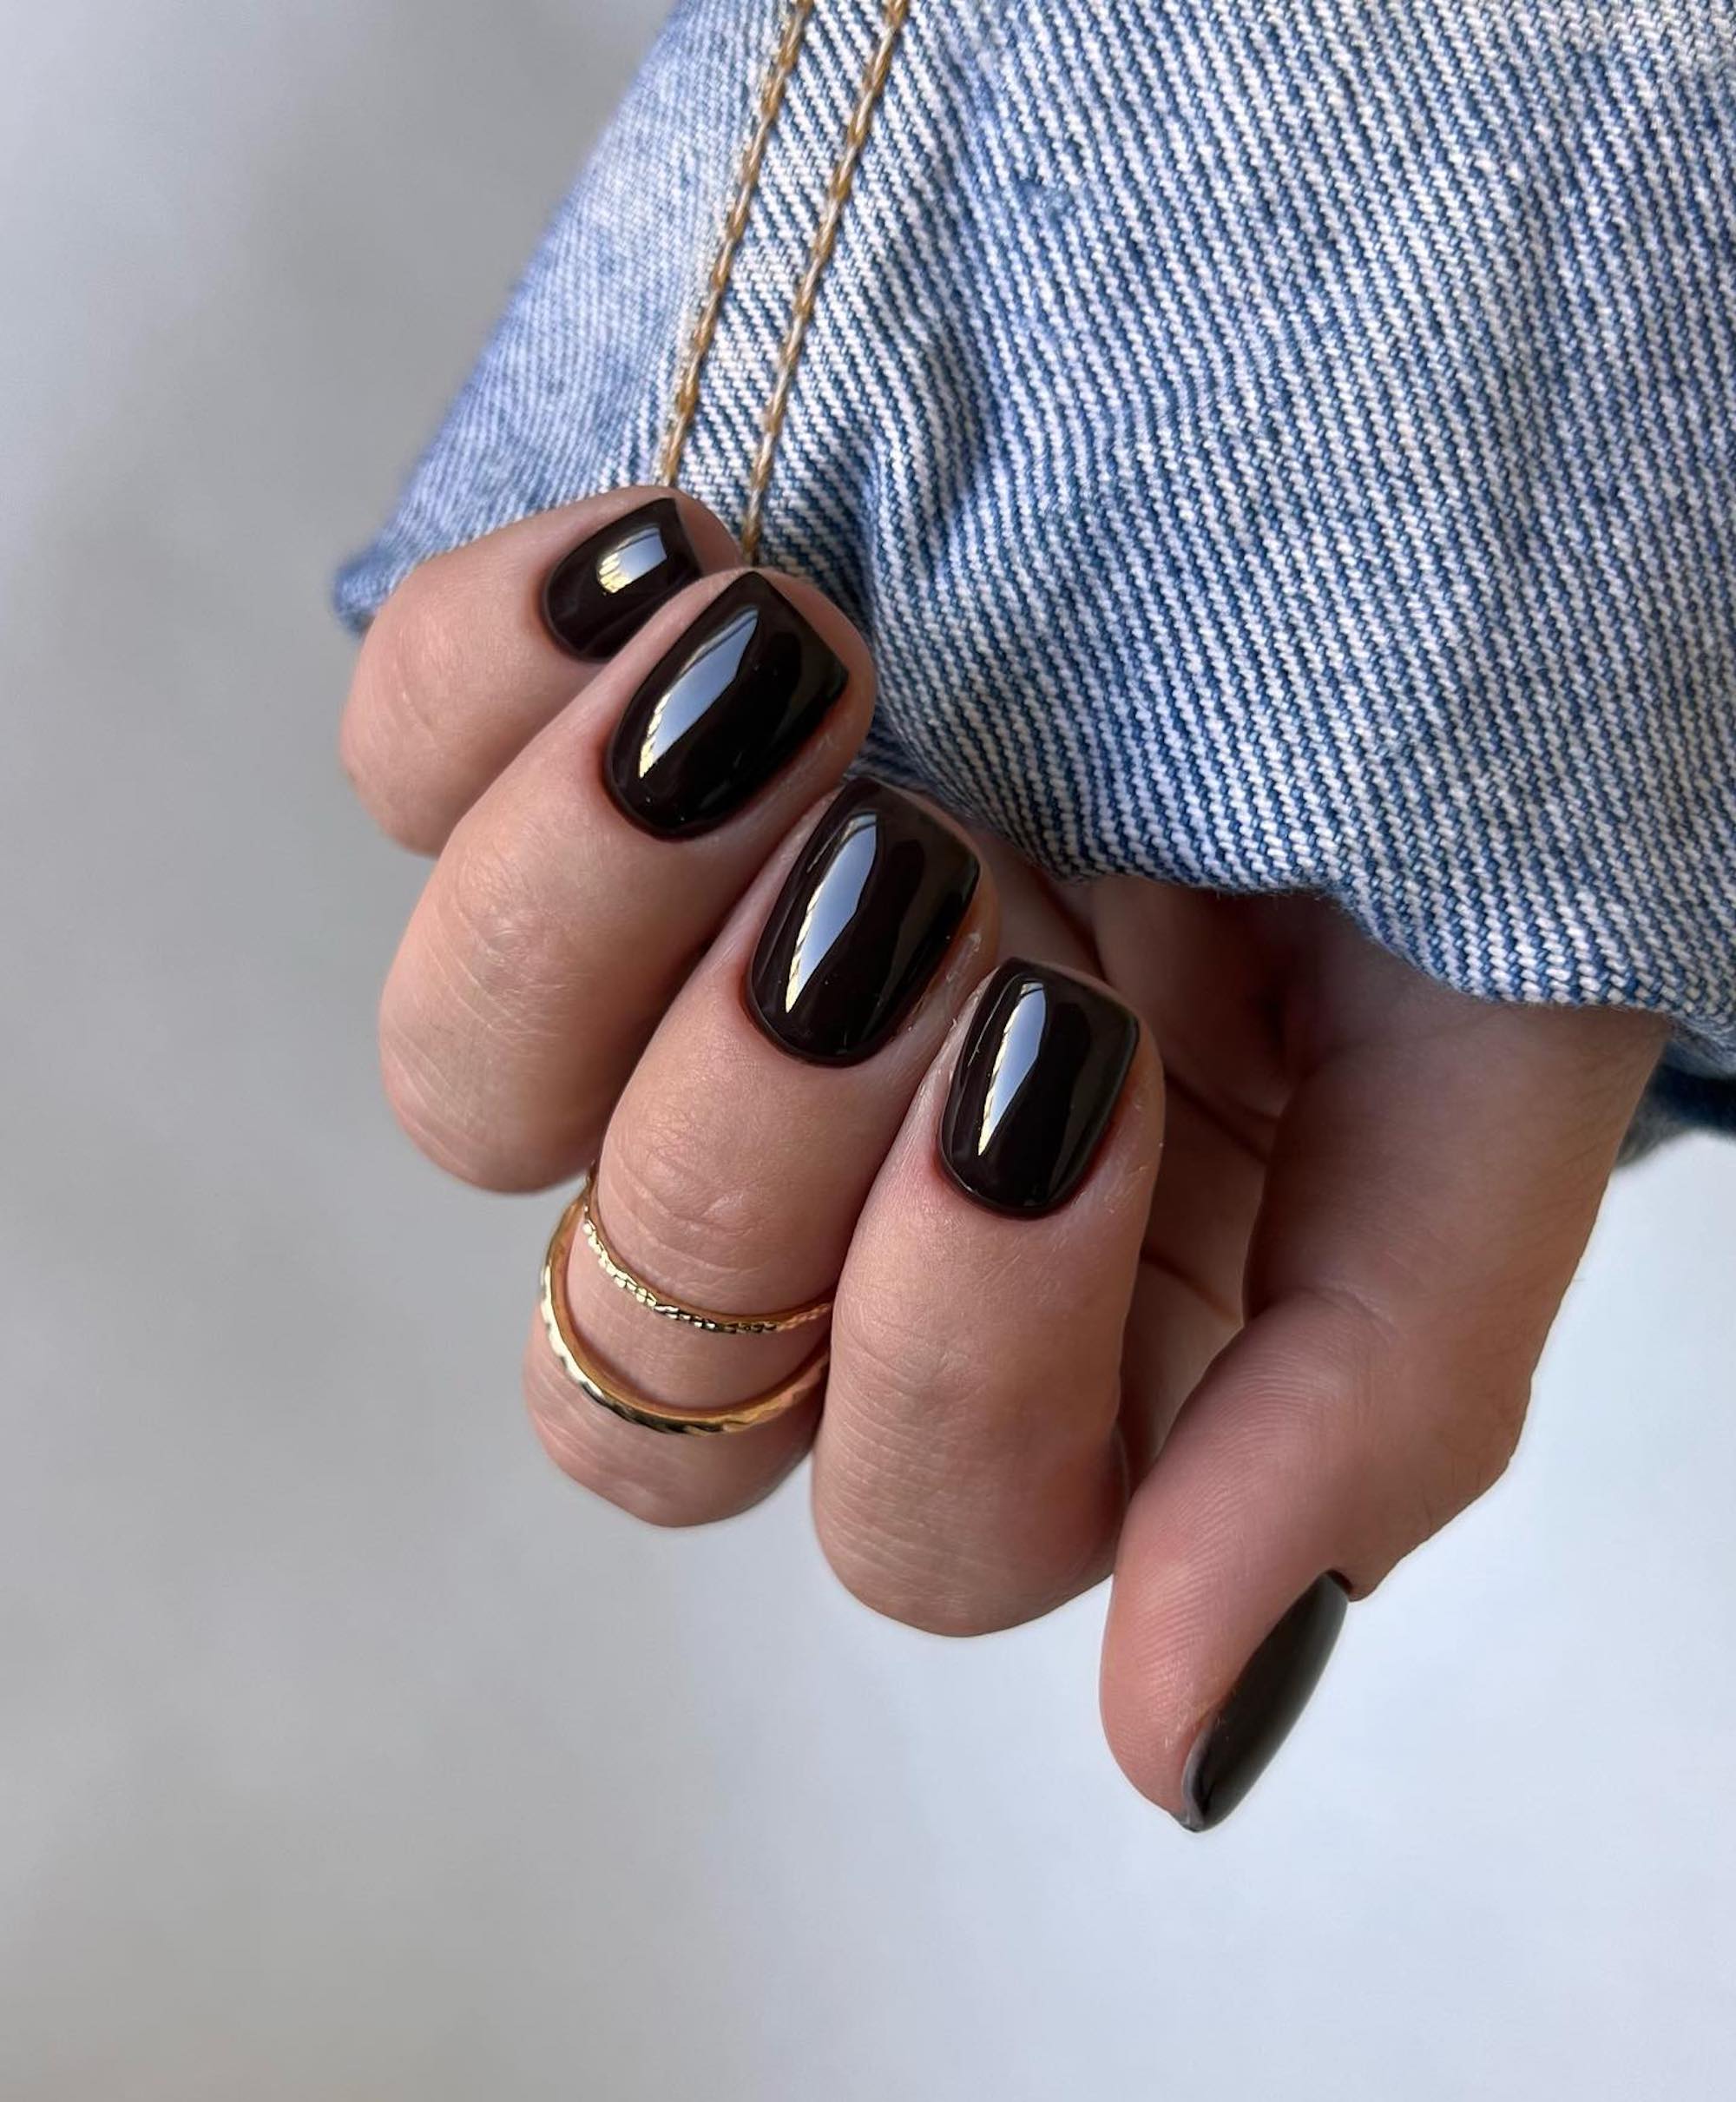 Gel-X Nail Manicures: Everything You Need to Know | Makeup.com